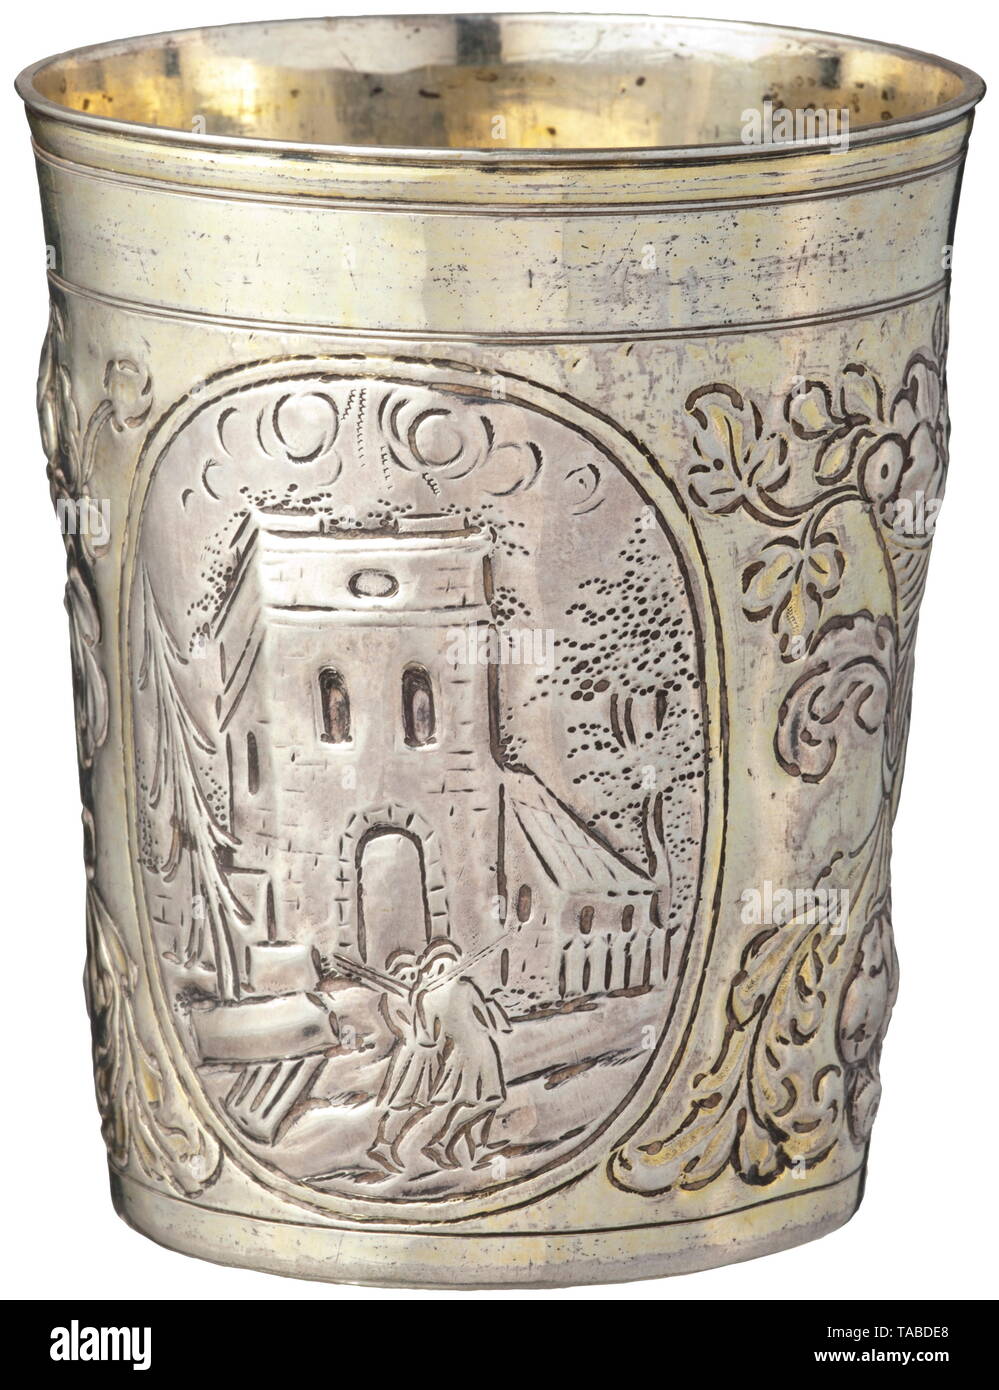 A silver beaker, Augsburg, late 17th century Partially gilt beaker with chased architectural and landscape decoration amidst floral ornaments. The bottom with Augsburg city mark, master's mark 'IL' (for Johann Joachim Lutz, master 1687, died 1727) and assayer's mark. Height 9.7 cm, weight 152.8 g. historic, historical, handicrafts, handcraft, craft, object, objects, stills, clipping, clippings, cut out, cut-out, cut-outs, Additional-Rights-Clearance-Info-Not-Available Stock Photo